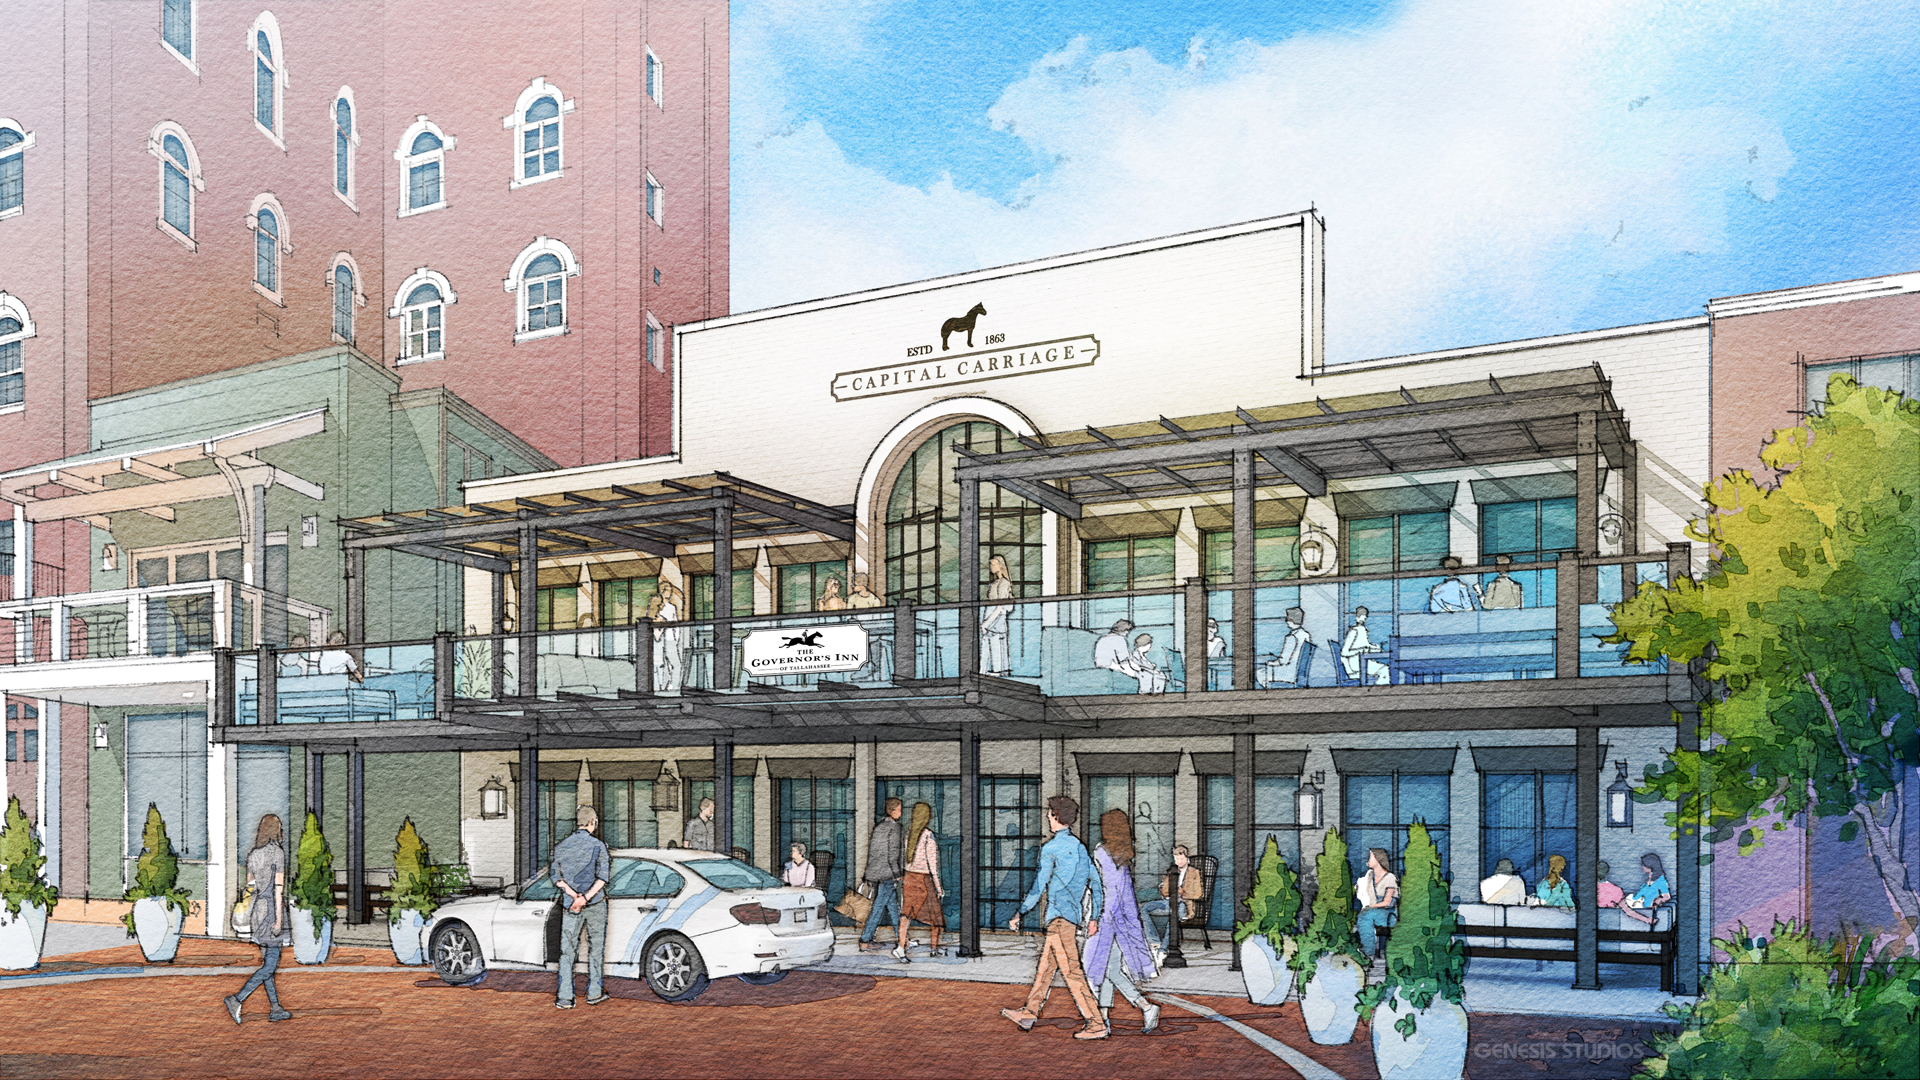 Rendering of the renovated Governor's Inn hotel in Tallahassee, Florida